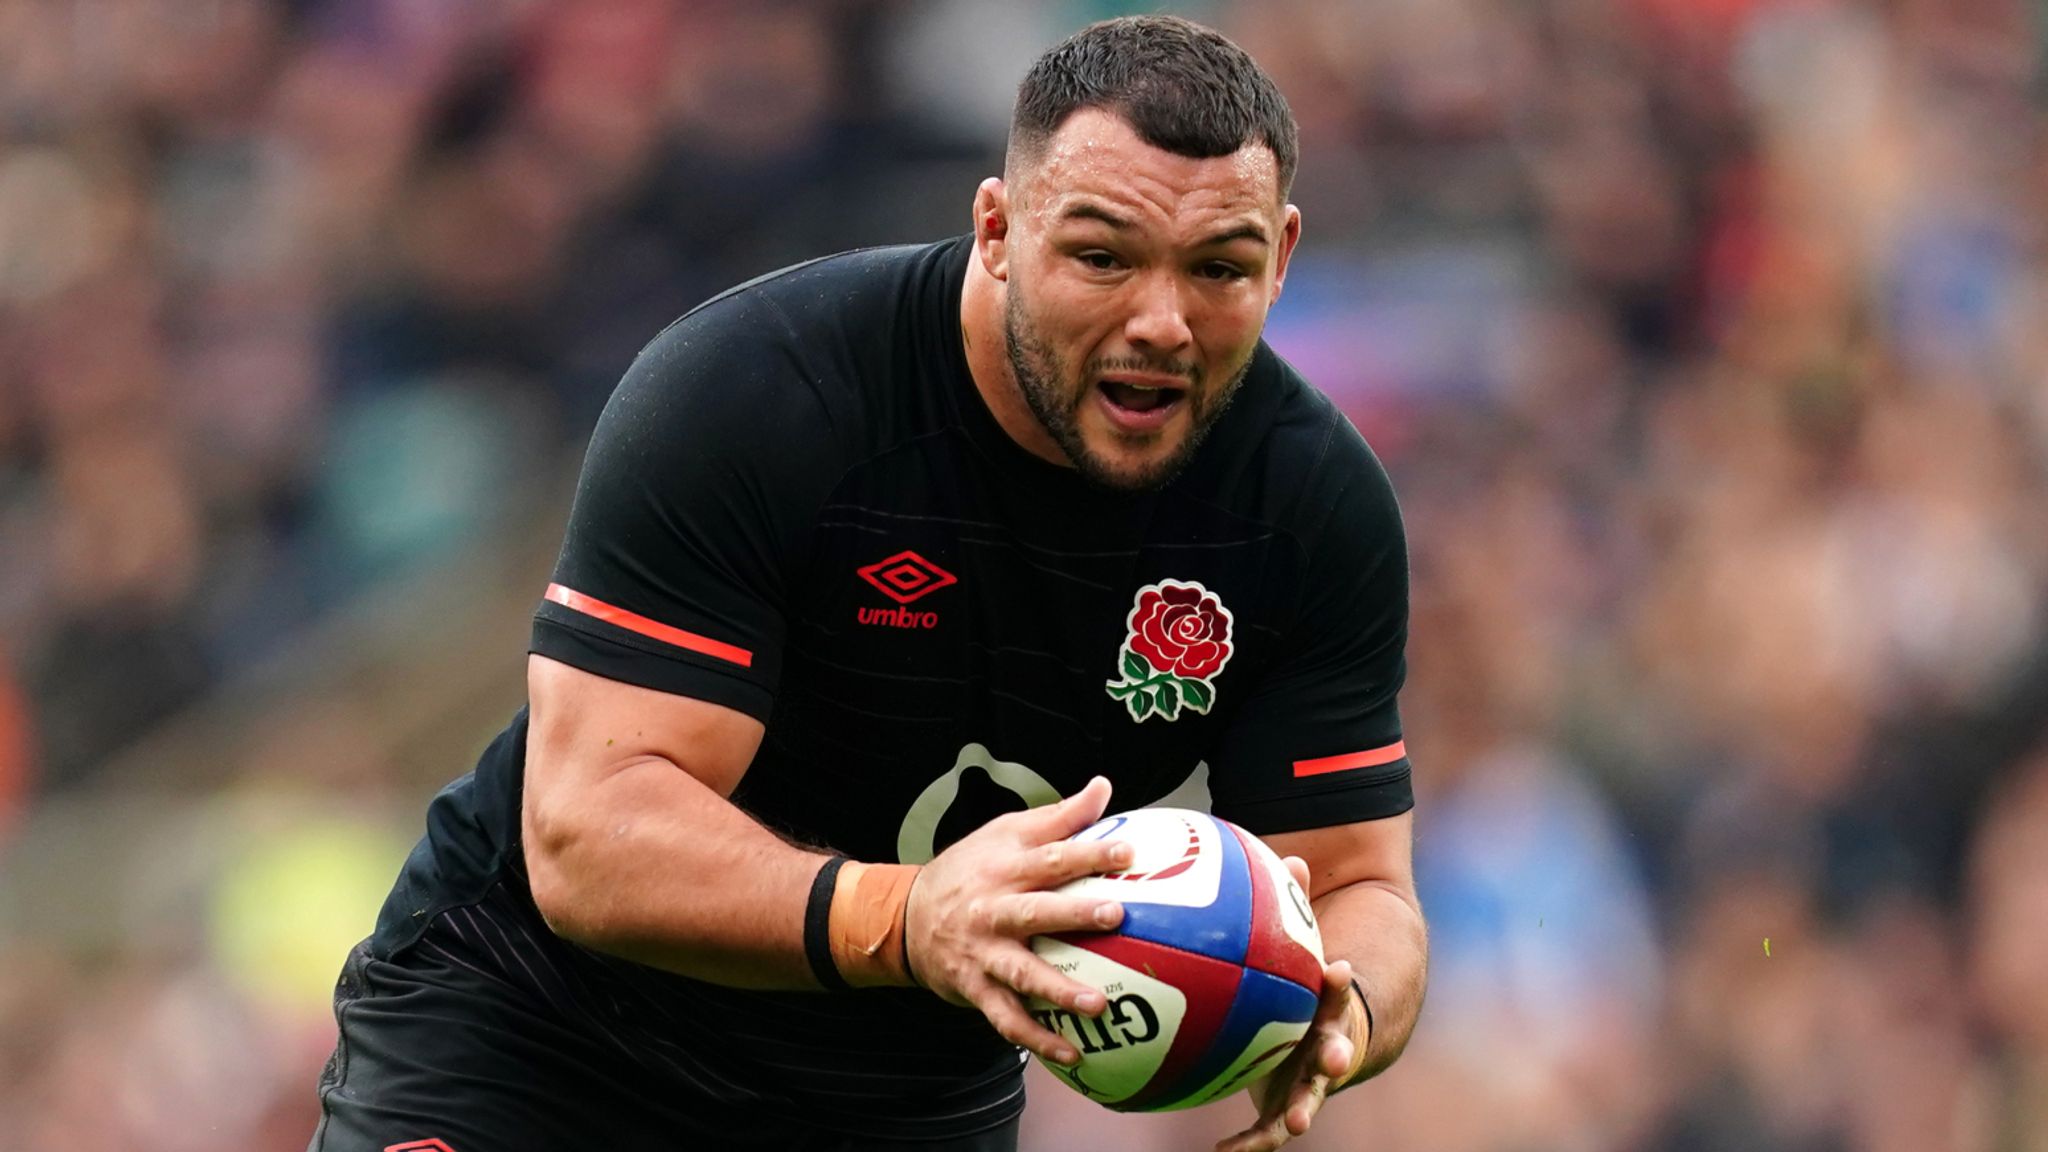 Ellis Genge England squad have made pact that France Six Nations drubbing cannot be repeated Rugby Union News Sky Sports